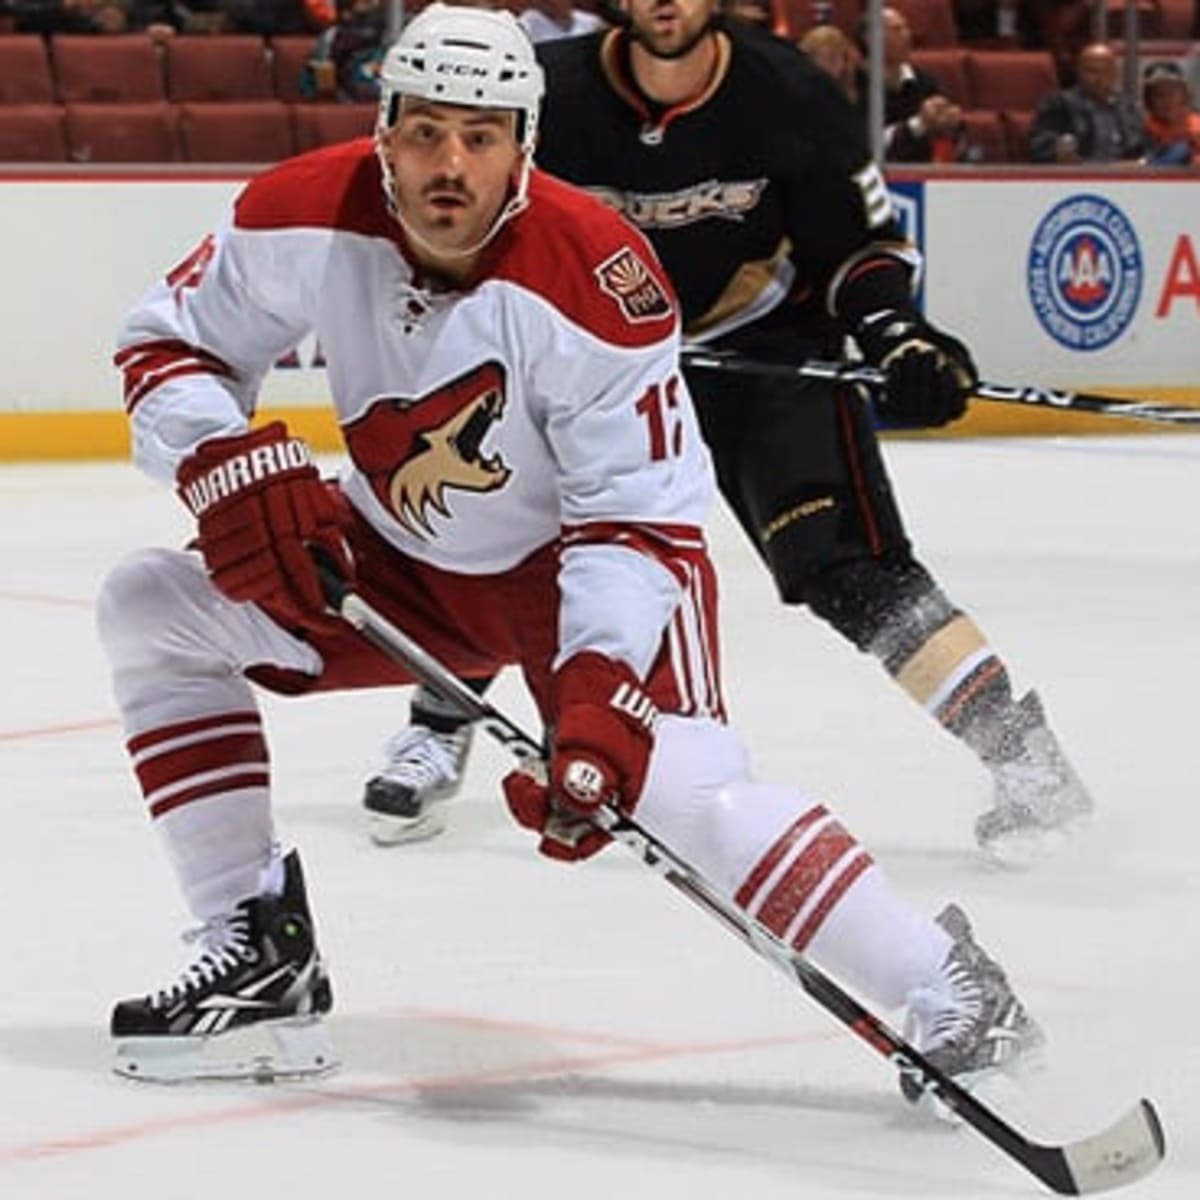 Where are you: Paul Bissonnette - The Hockey News